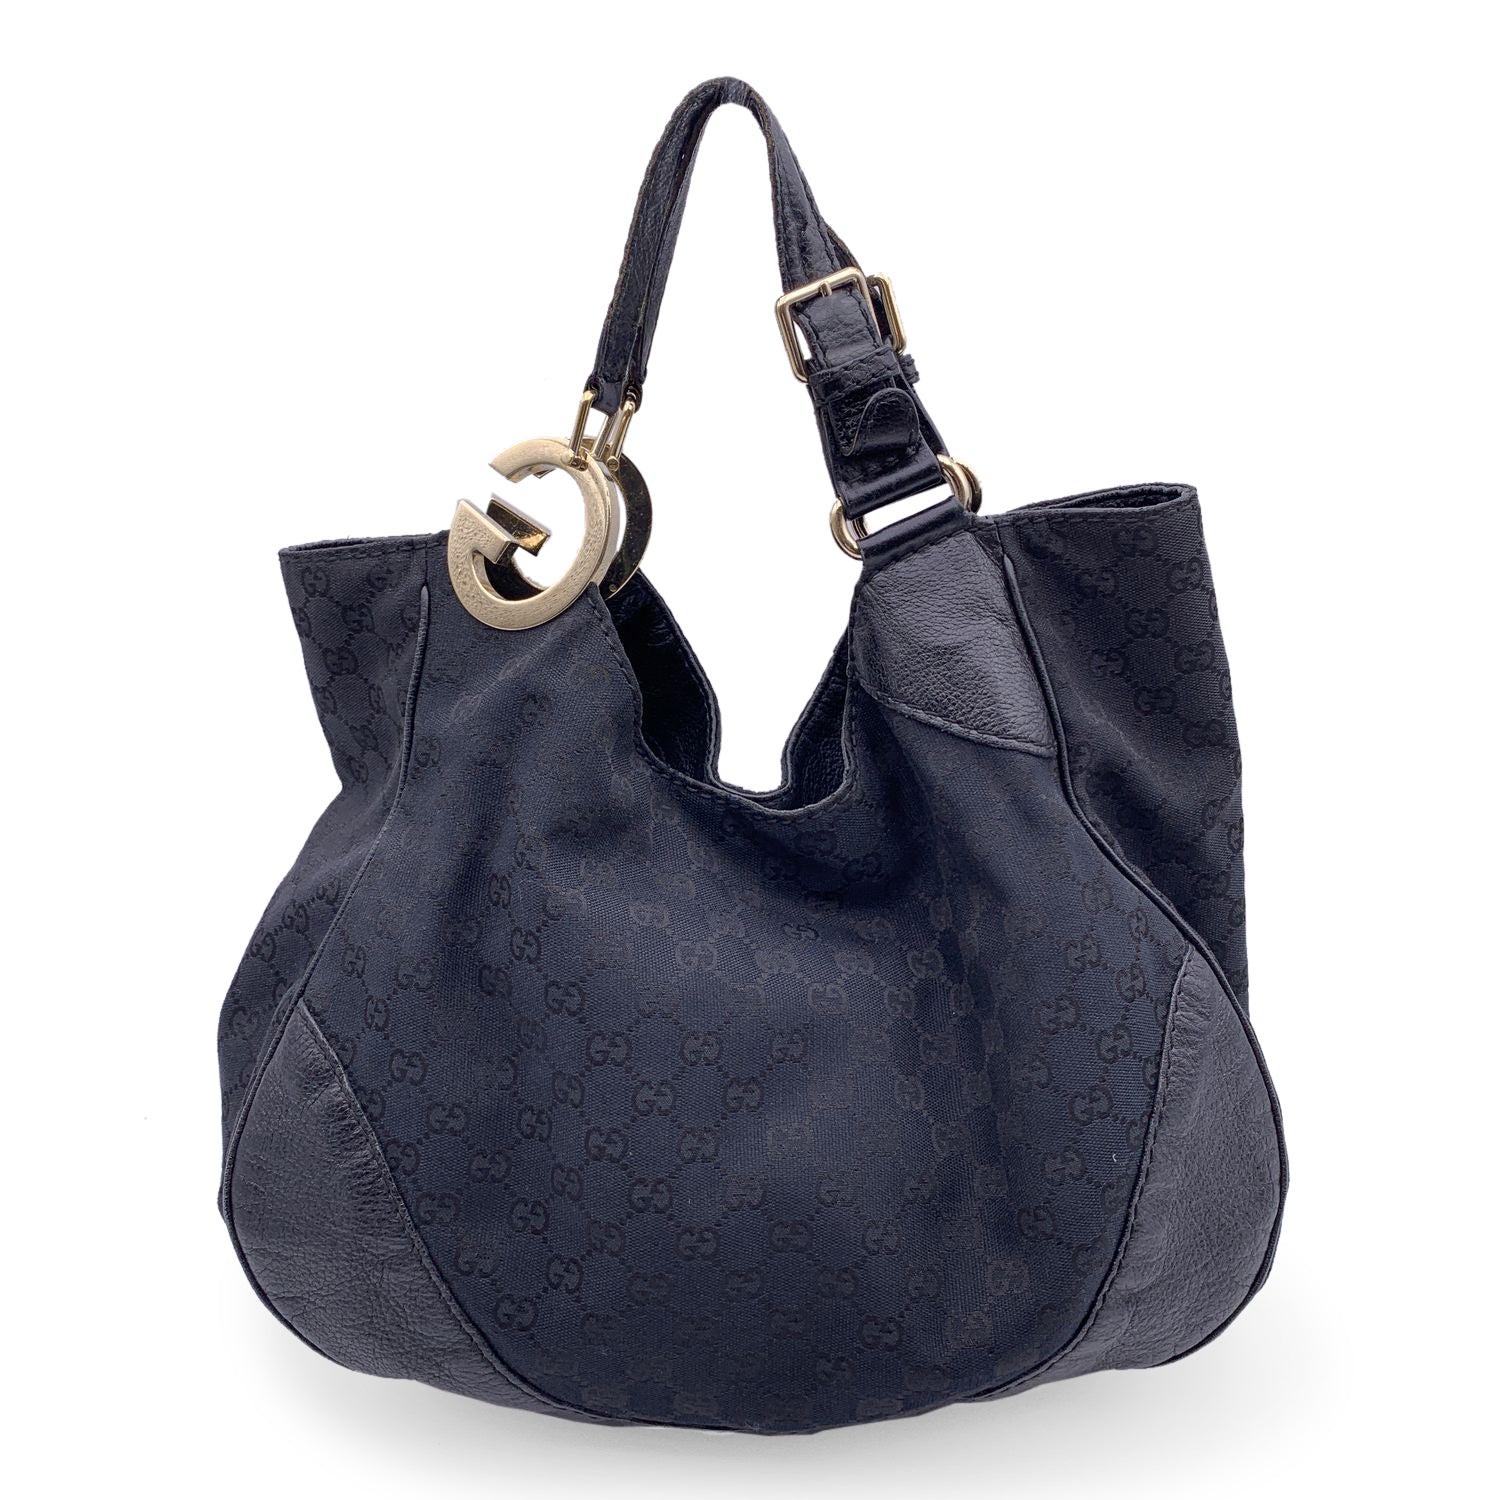 Gucci black monogram canvas Charlotte bag . Black canvas tote bag with black leather trim and handles. Gold metal GG detailing on handles. Magnetic button closure on top. Black fabric lining. 1 side zip pocket inside. 'GUCCI - Made in Italy' tag